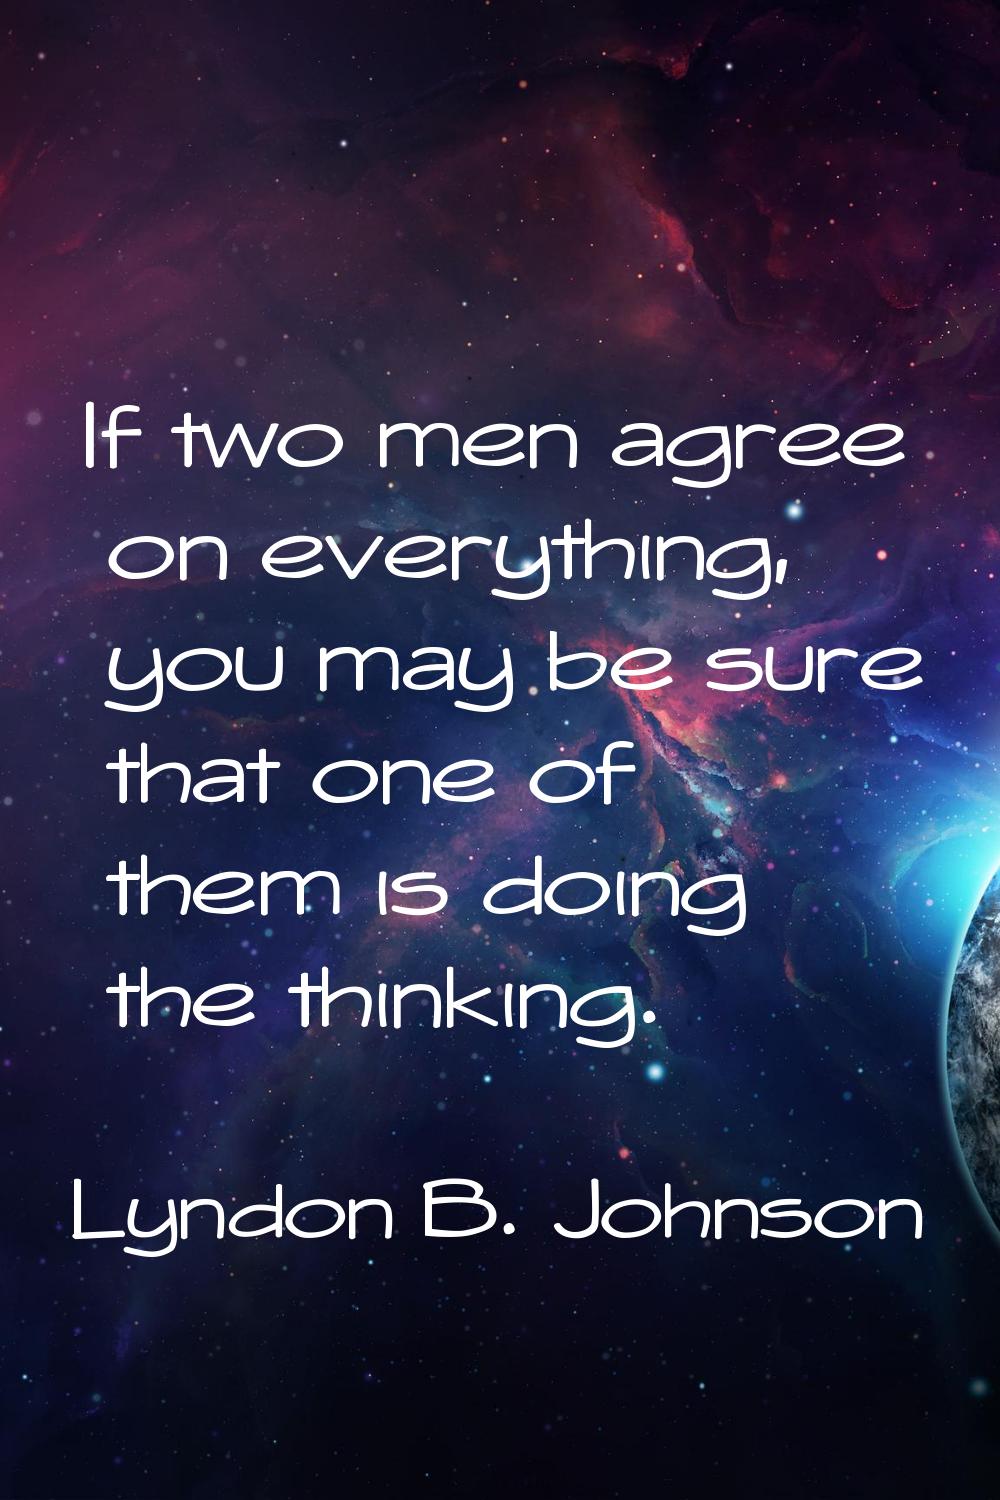 If two men agree on everything, you may be sure that one of them is doing the thinking.